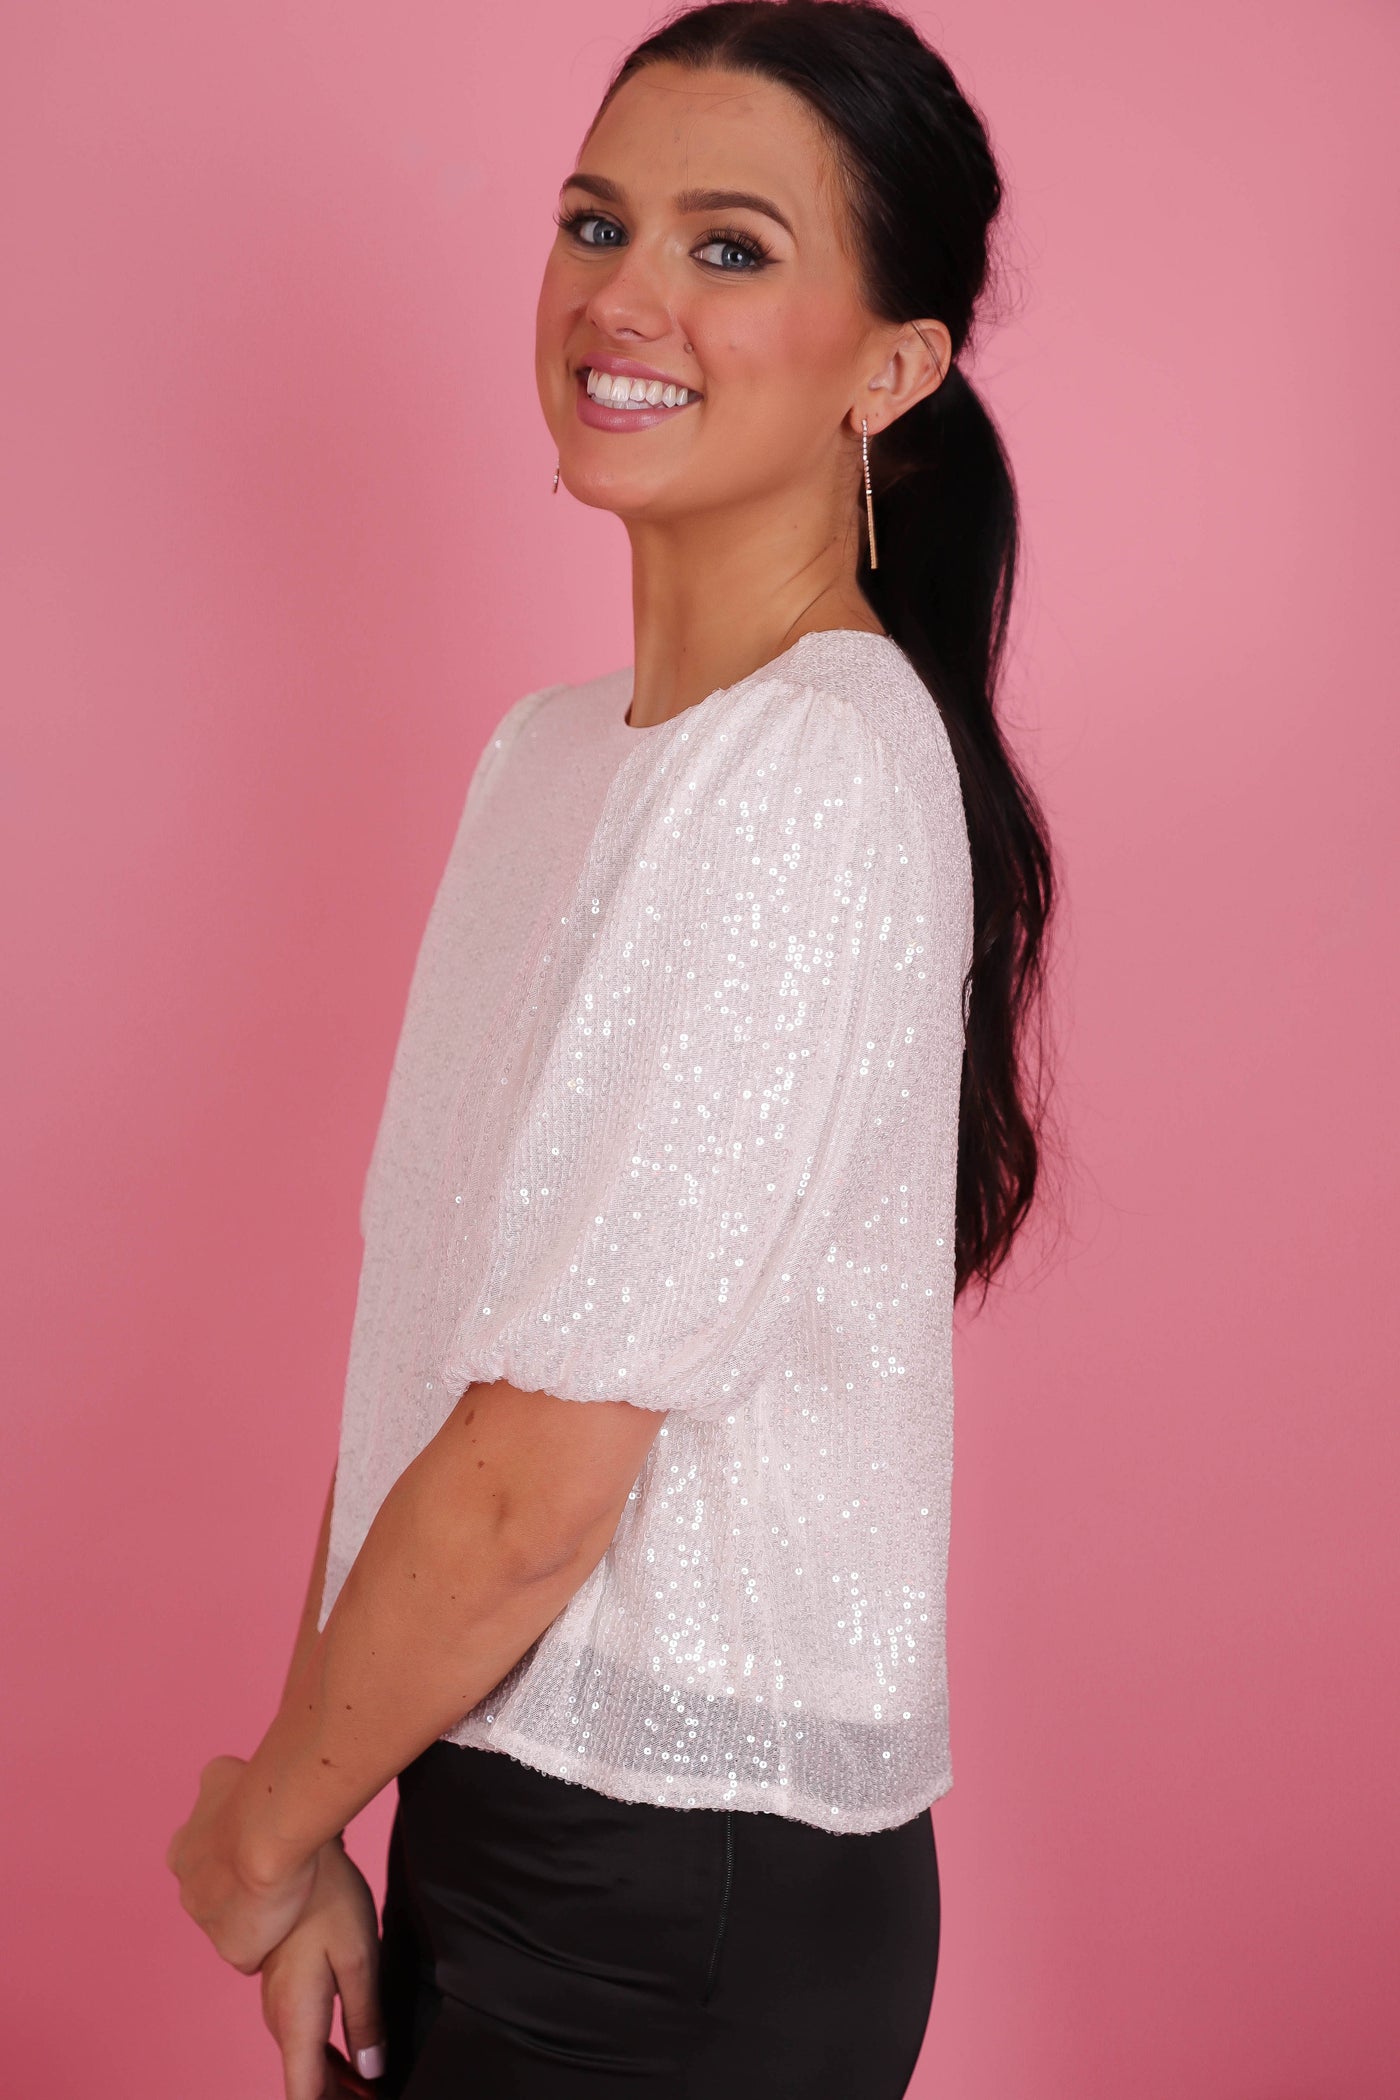 Women's White Sequin Blouse- Women's Holiday Tops- She + Sky Sequin Top